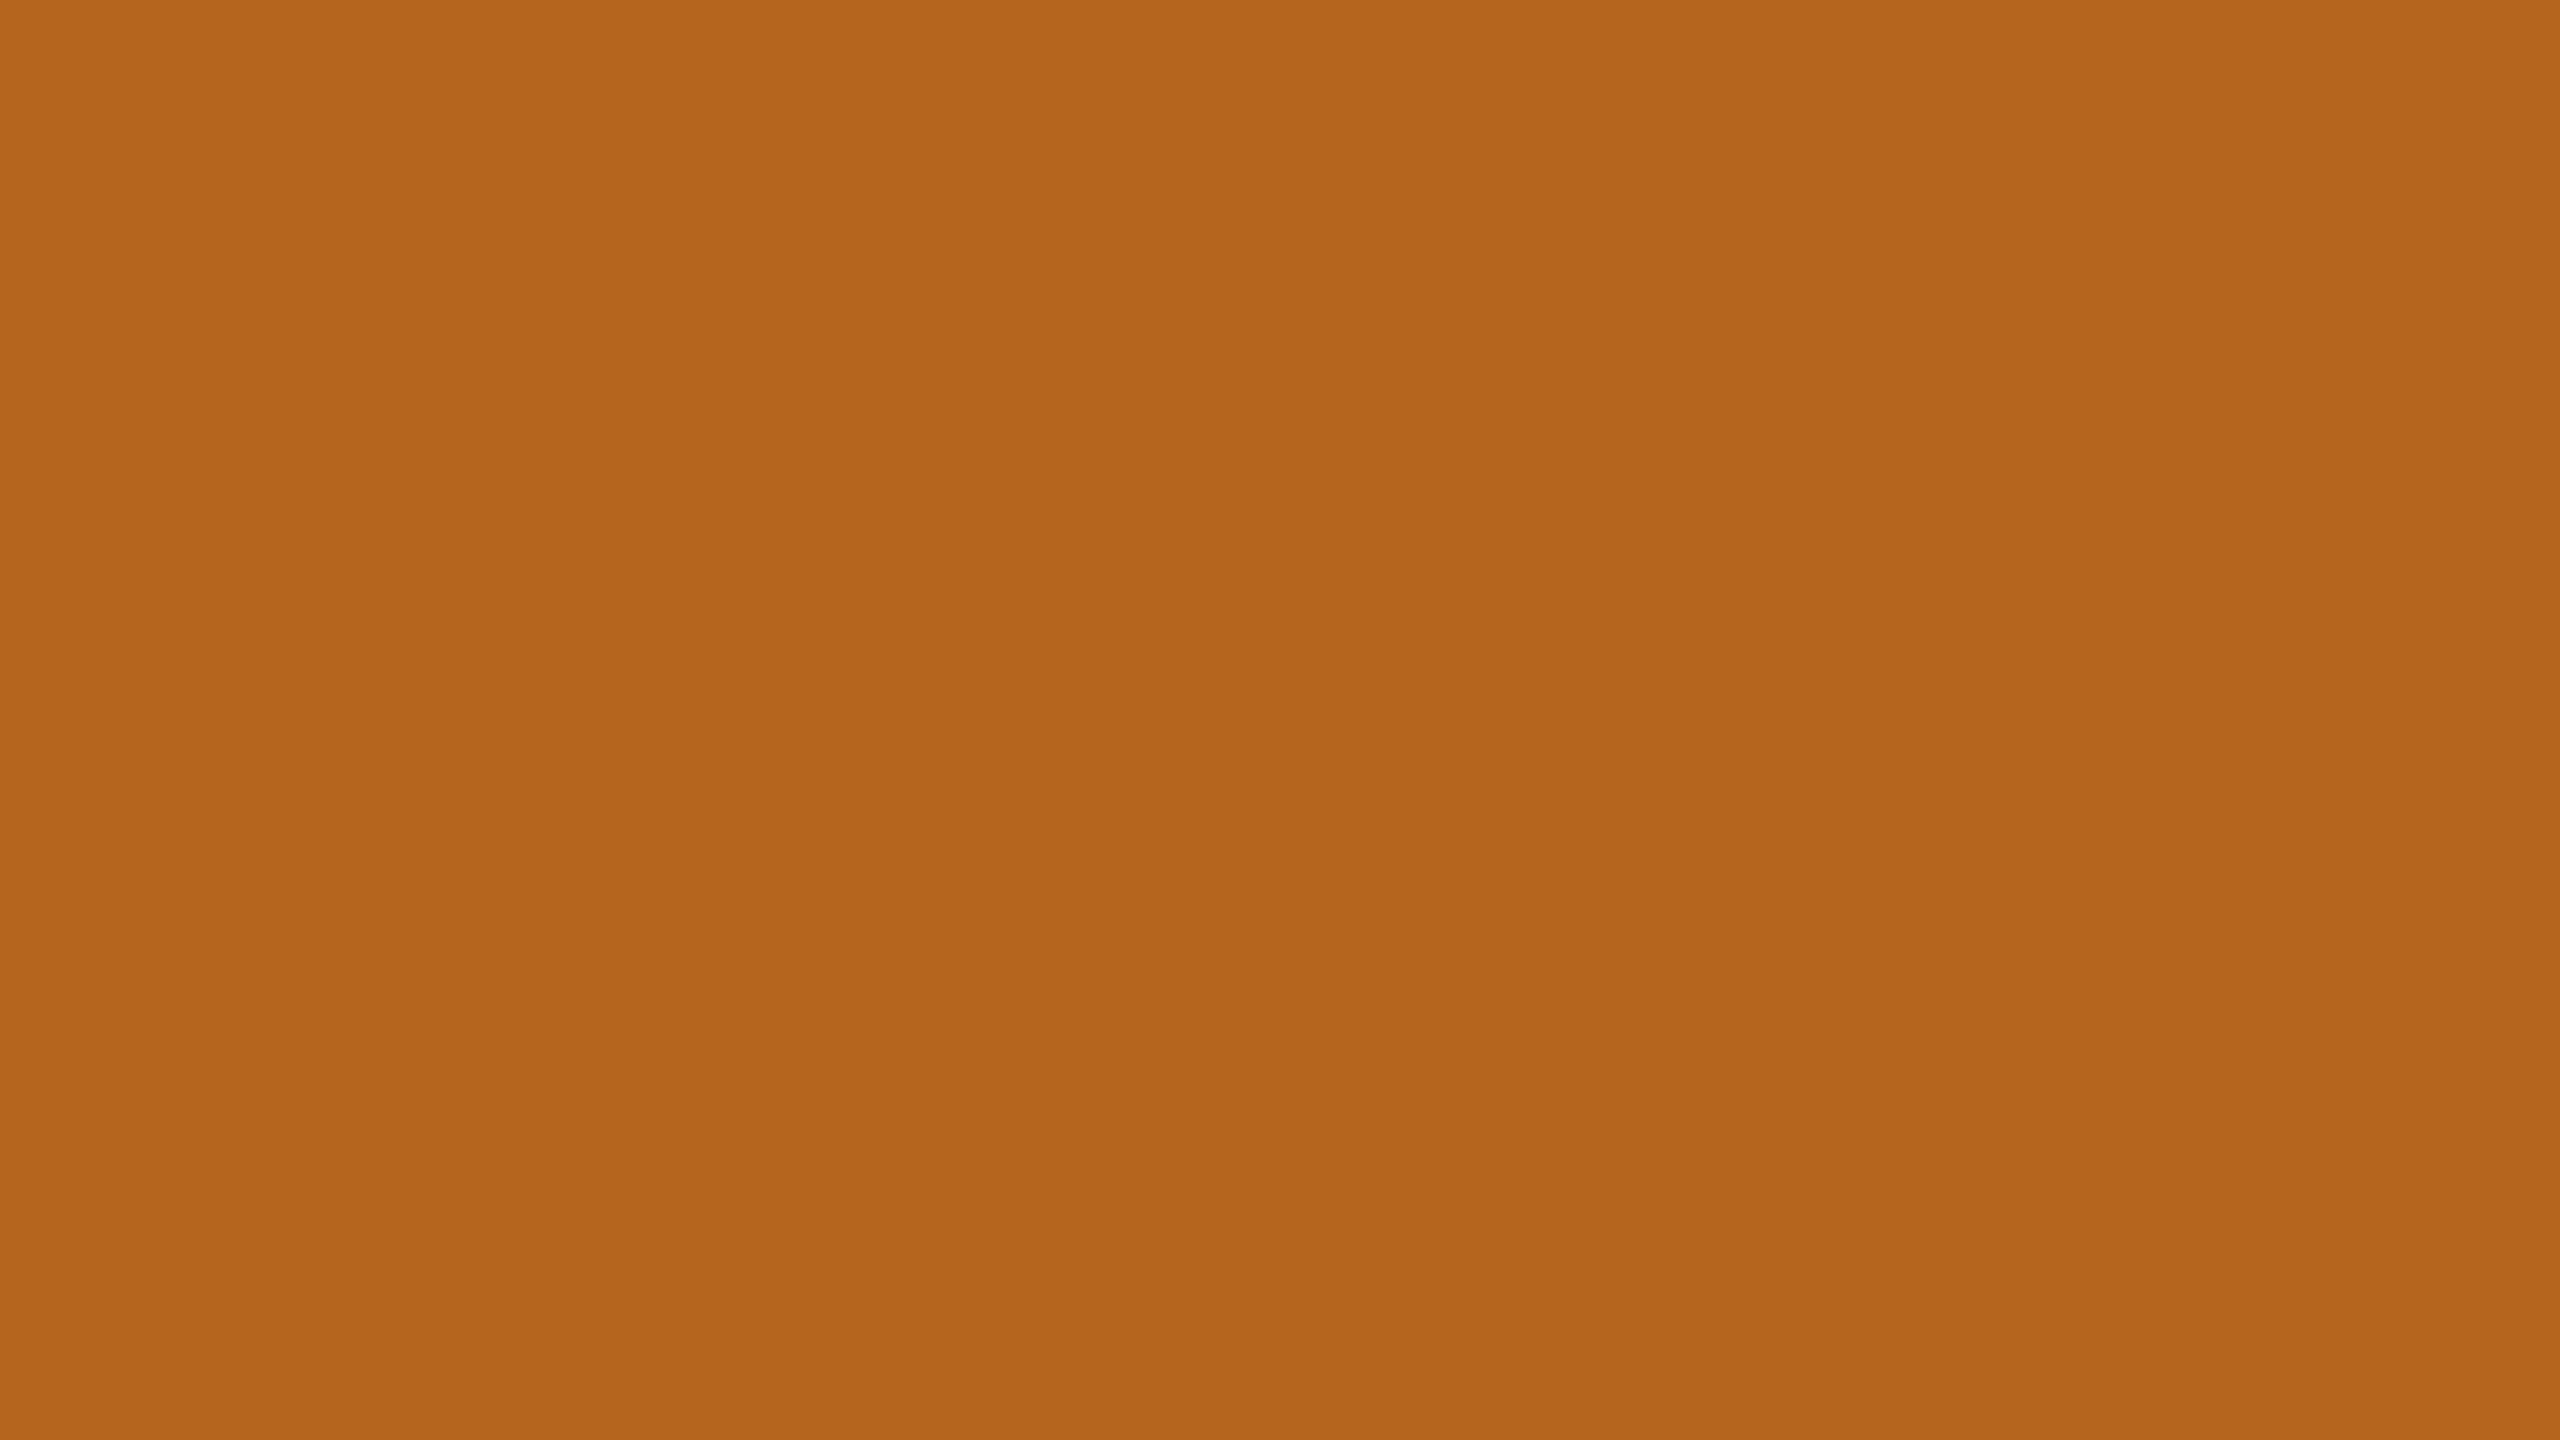 Plain Brown Backgrounds